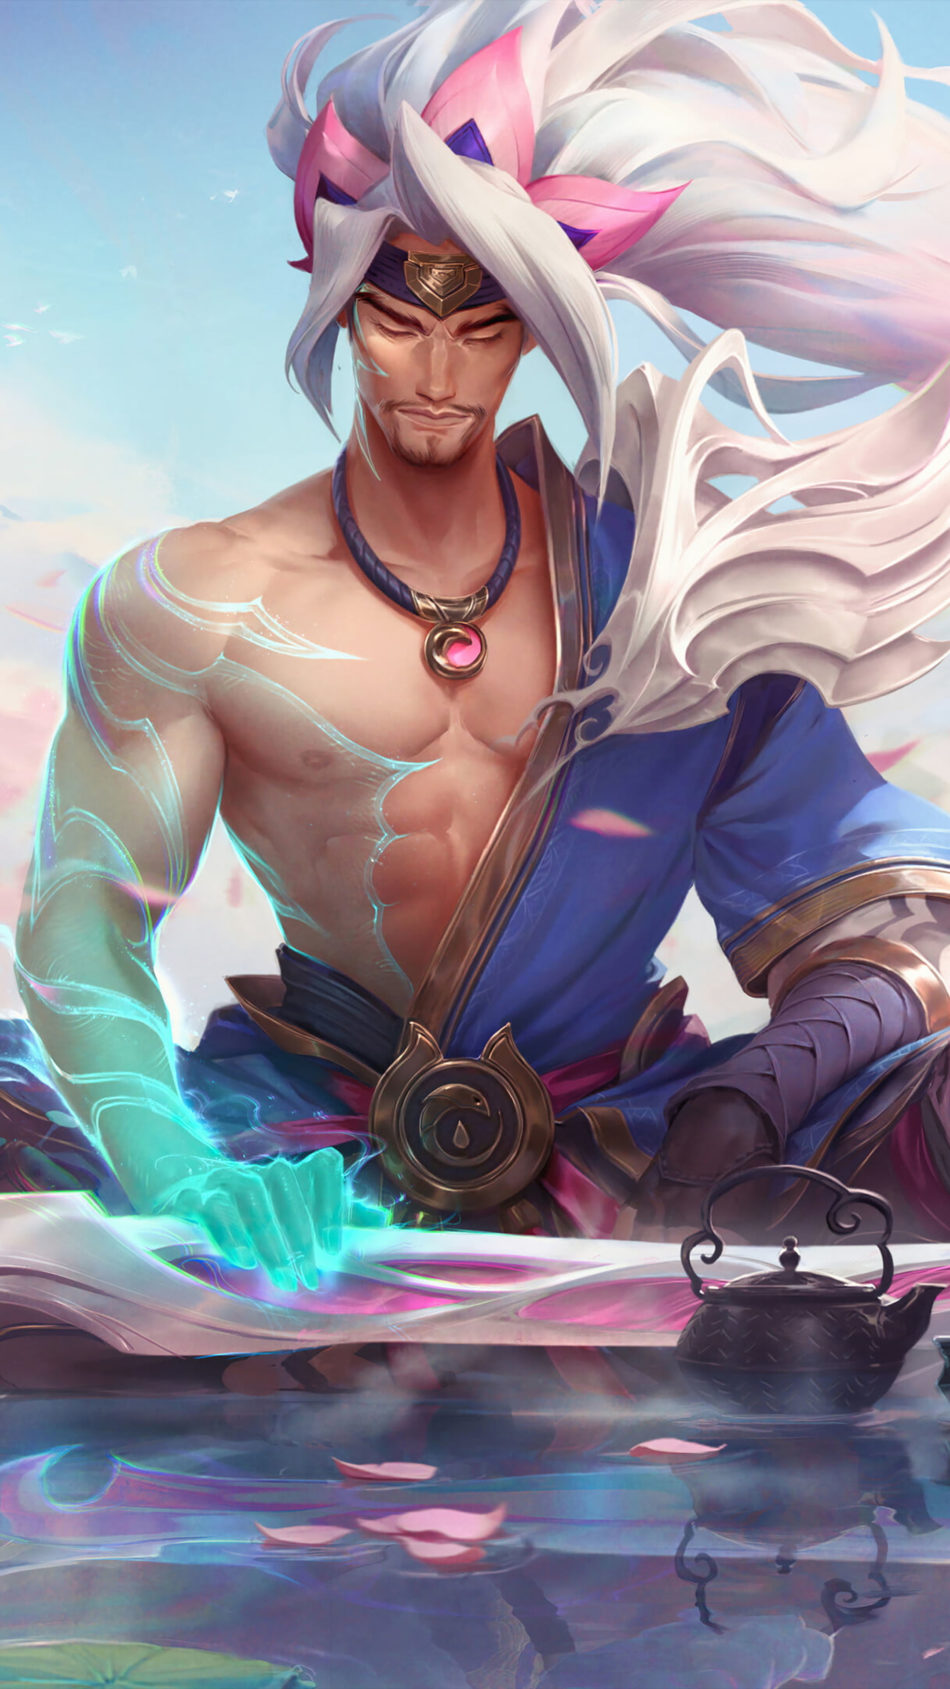 Wallpaper ID: 442778 / Video Game League Of Legends Phone Wallpaper, Yasuo (League  Of Legends), Sword, 750x1334 free download